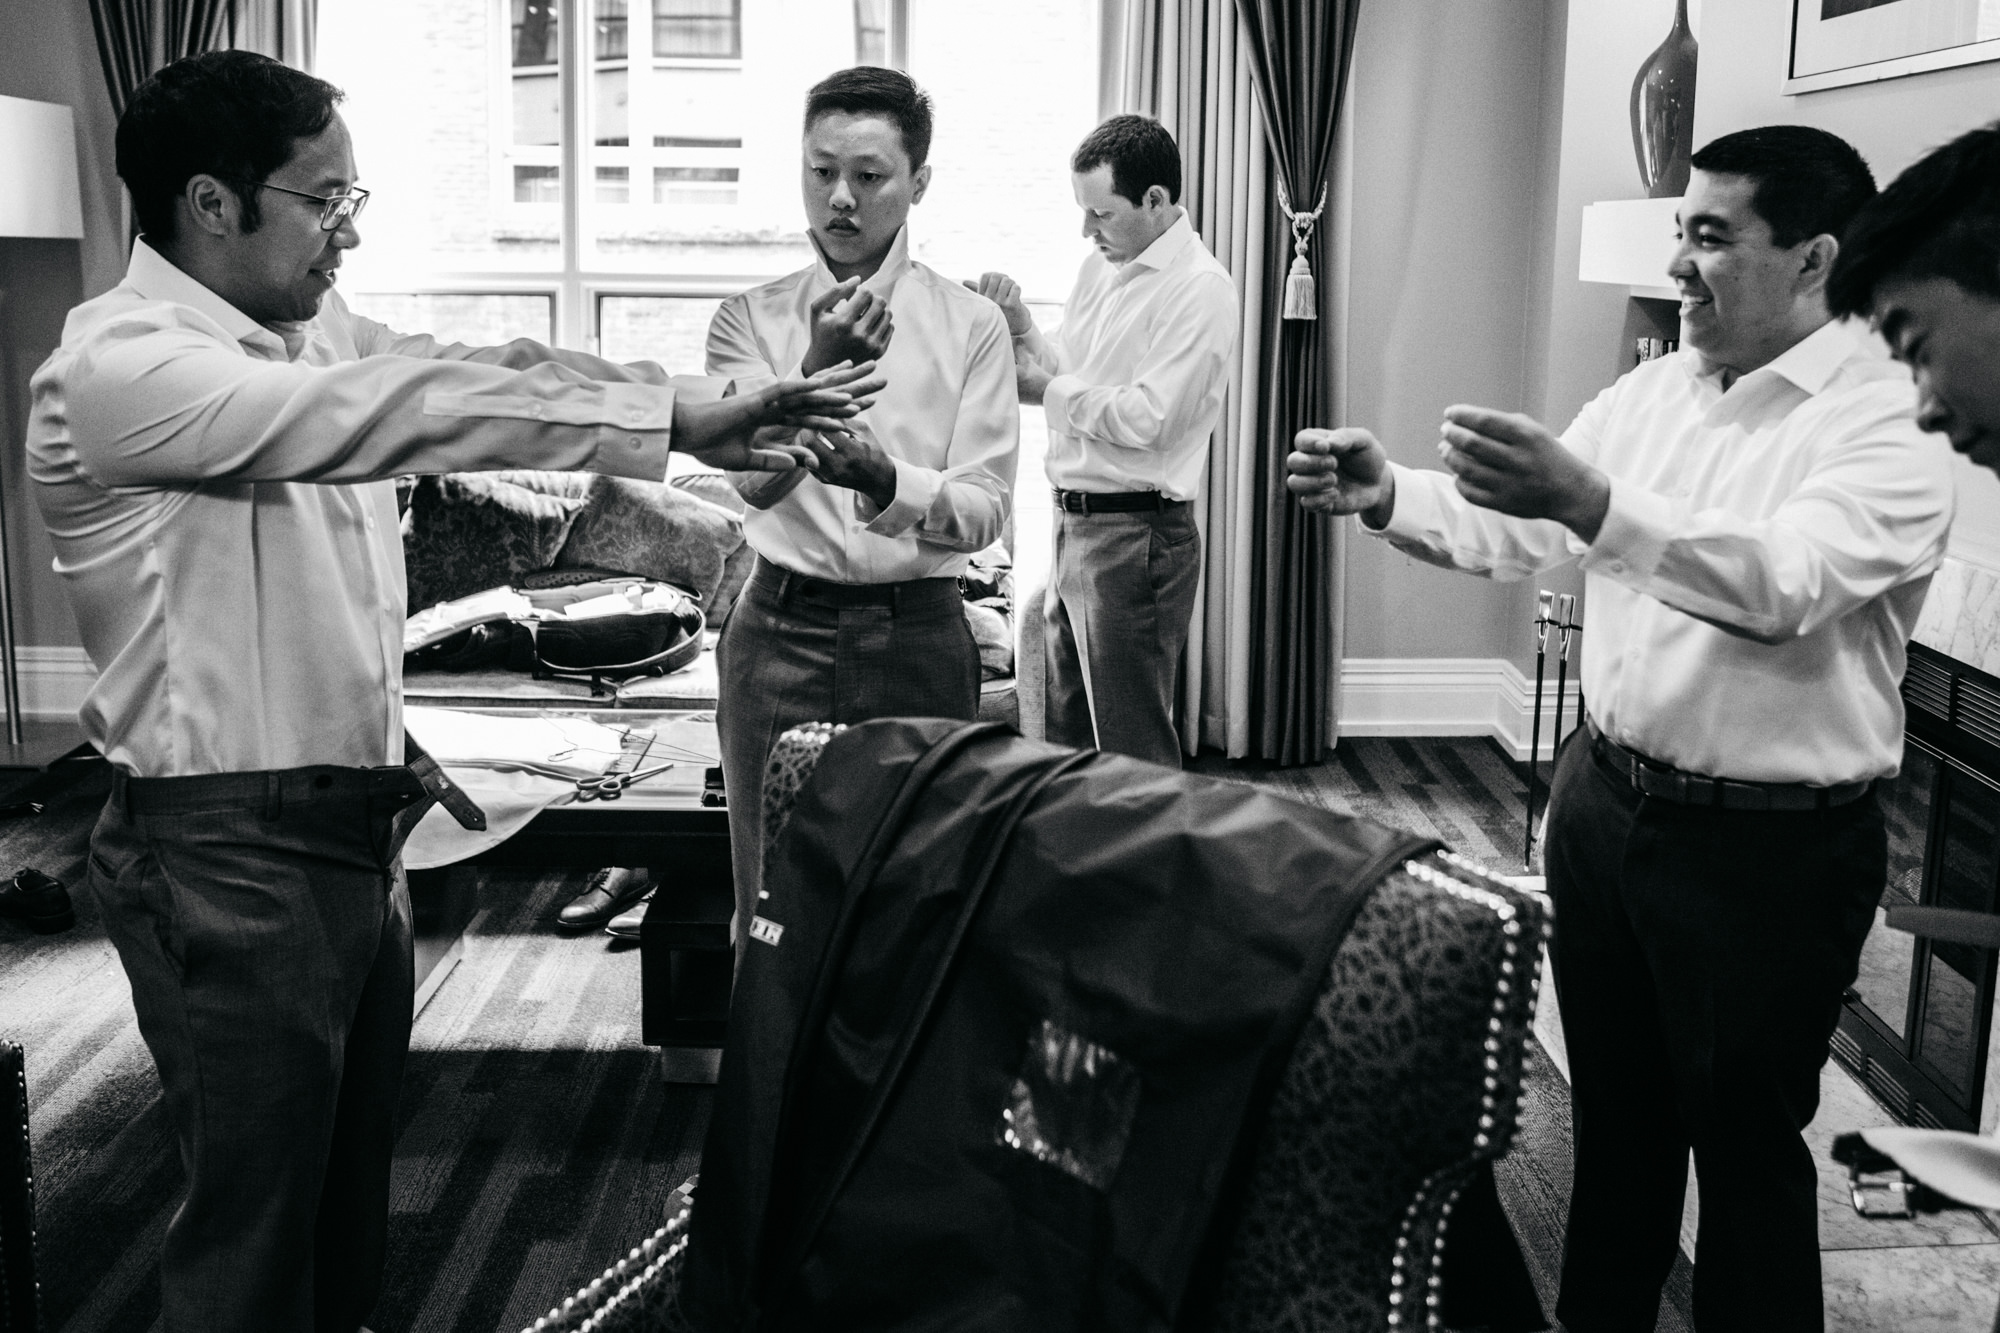 Jeremy and his groomsmen get ready for Jeremy's wedding at Alexis Hotel, Seattle WA. 